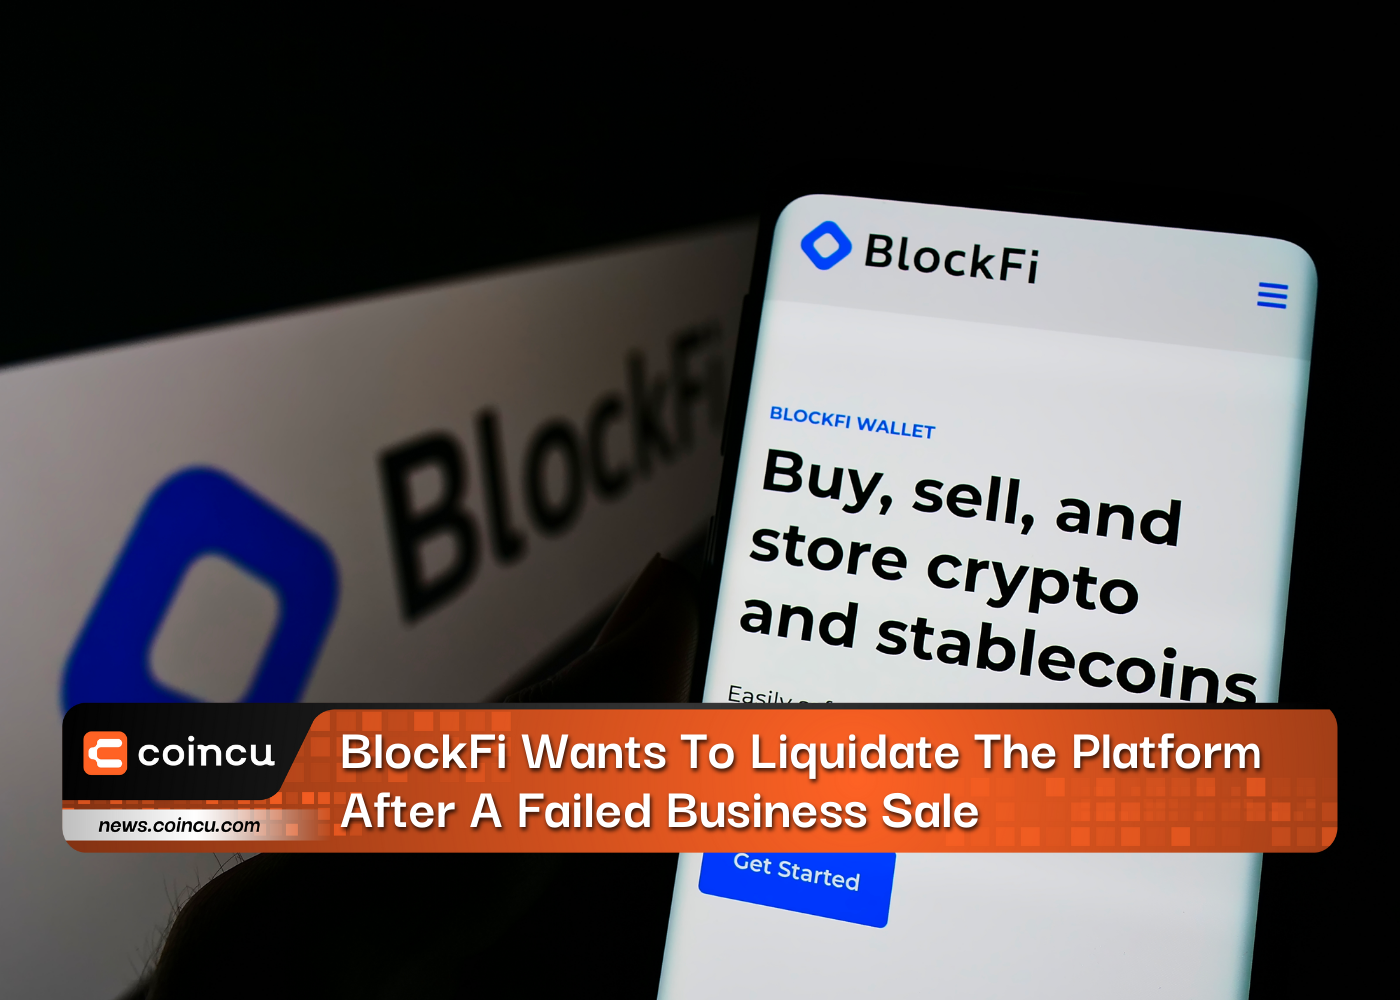 BlockFi Wants To Liquidate The Platform After A Failed Business Sale